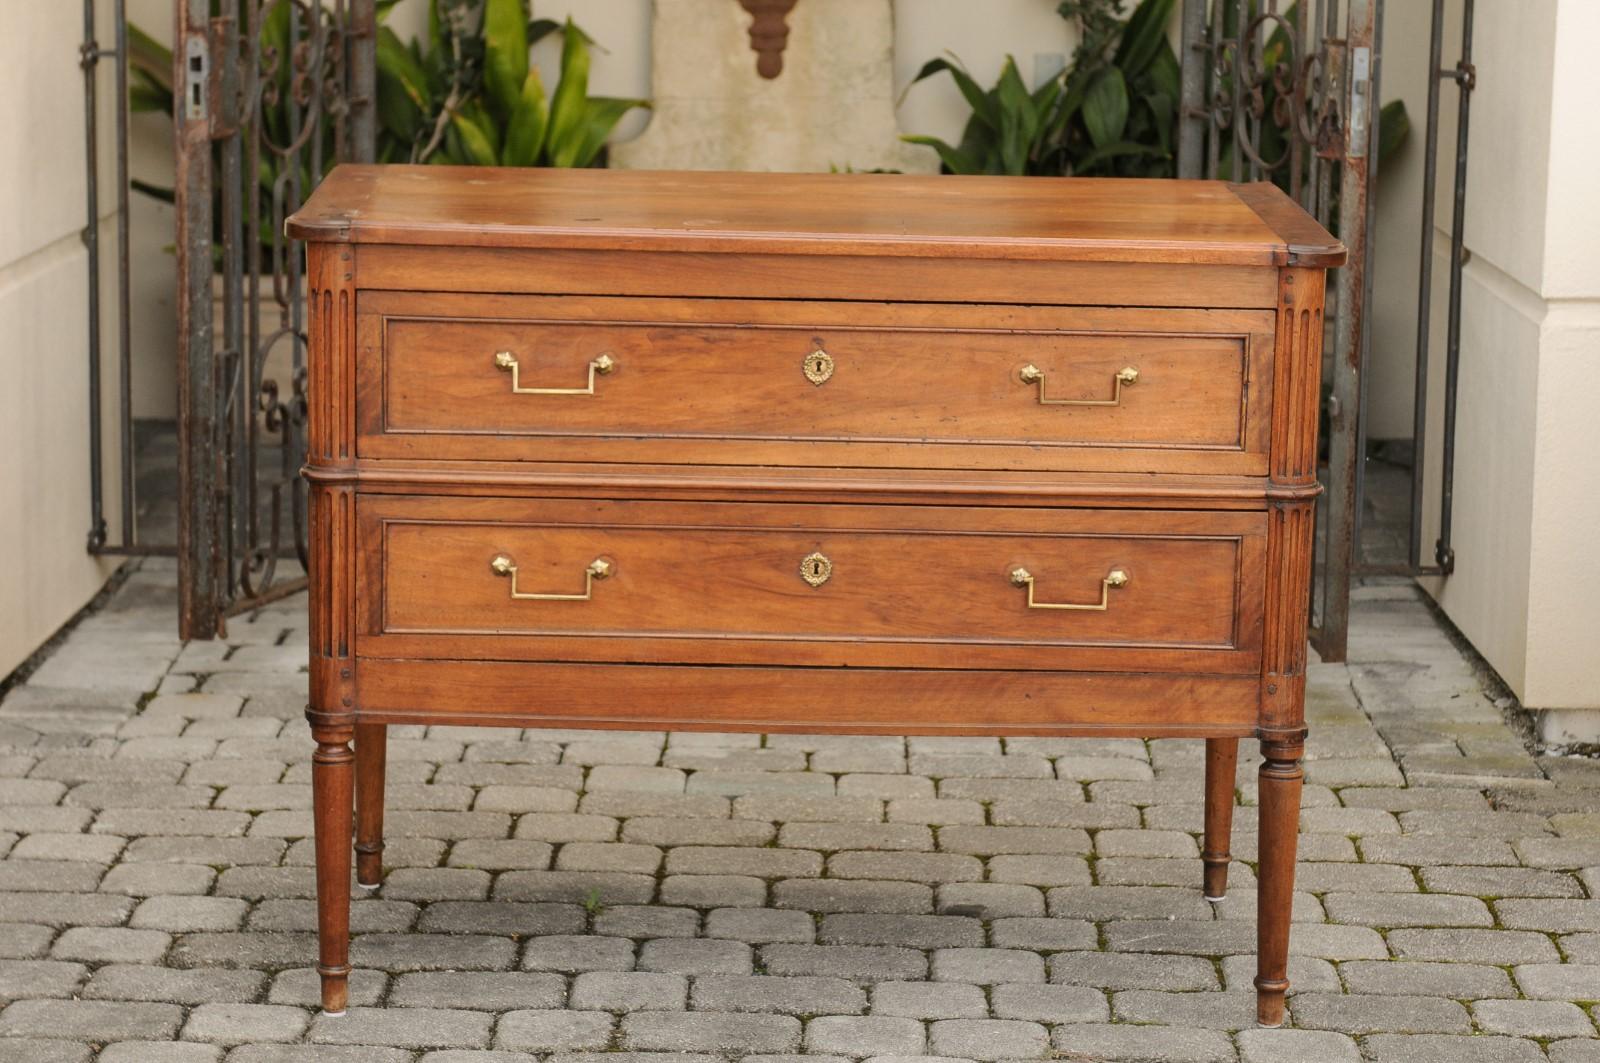 A French Directoire style walnut veneered two-drawer commode from the first half of the 19th century with brass hardware, fluted side posts and turned legs. This French walnut commode features a rectangular top with rounded corners in the front,